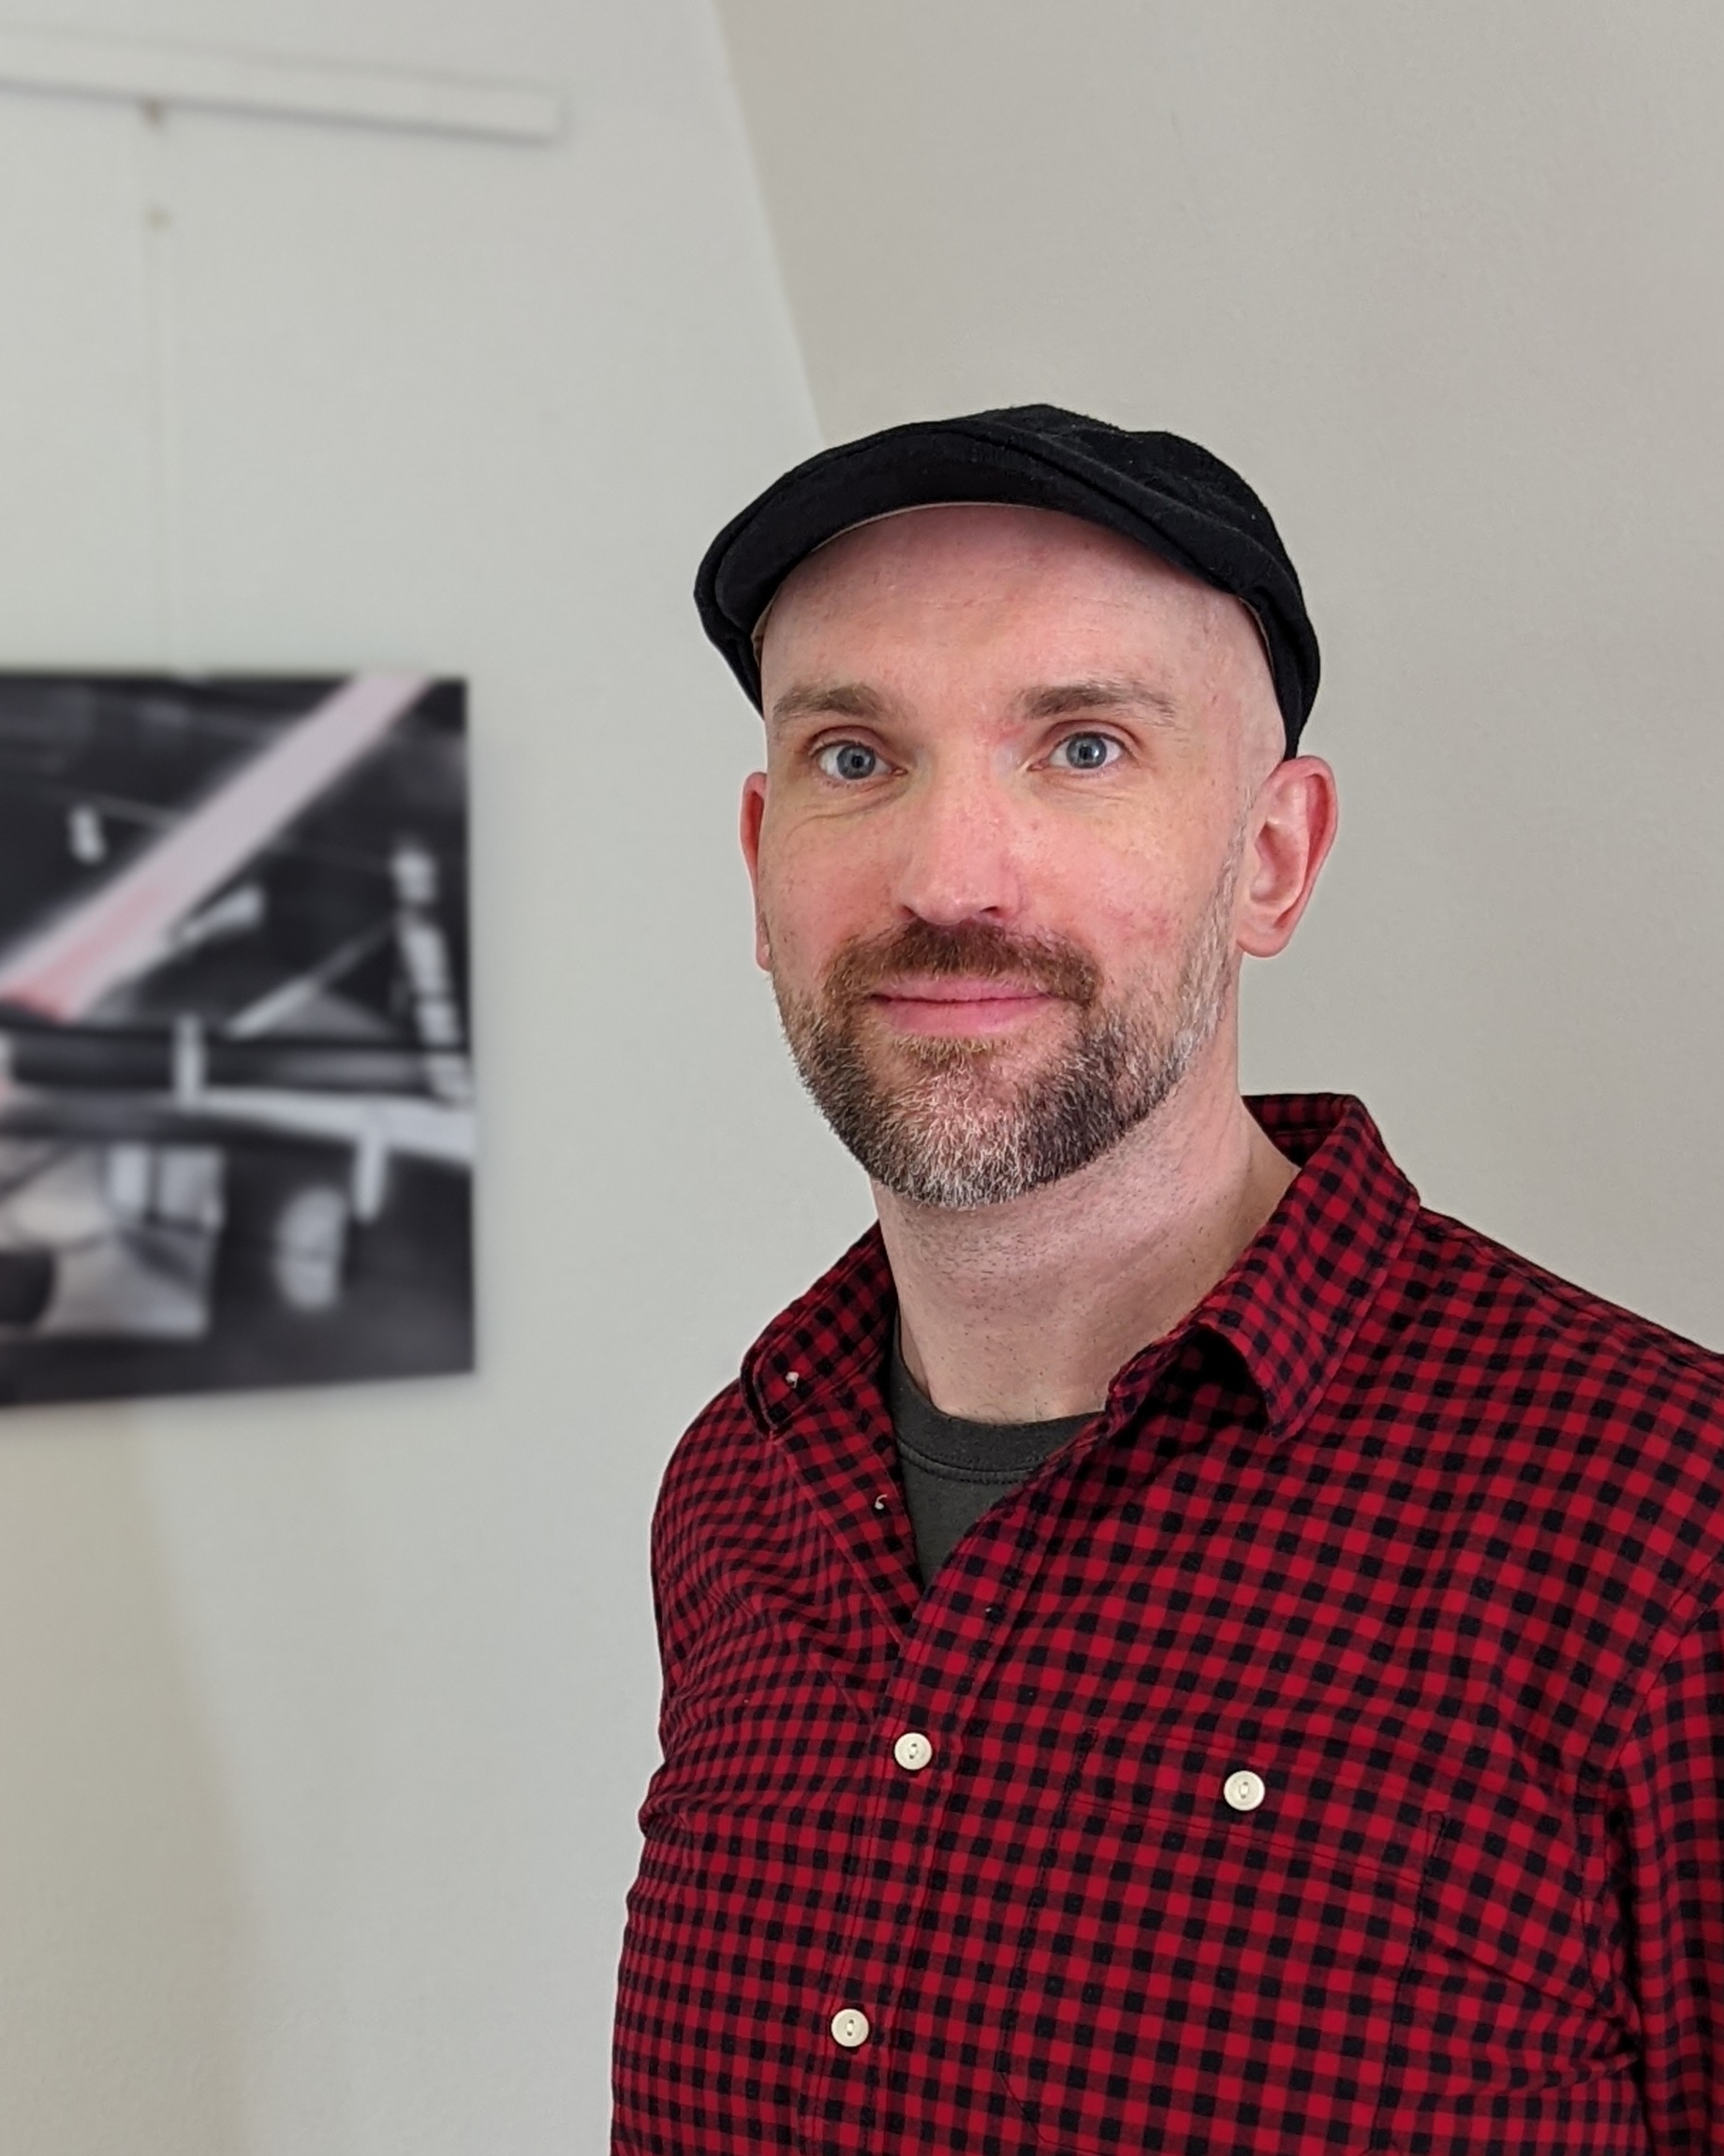 Portrait of the artist Björn Berg. He have an open friendly face. One of his abstract pictures is visible in the background.